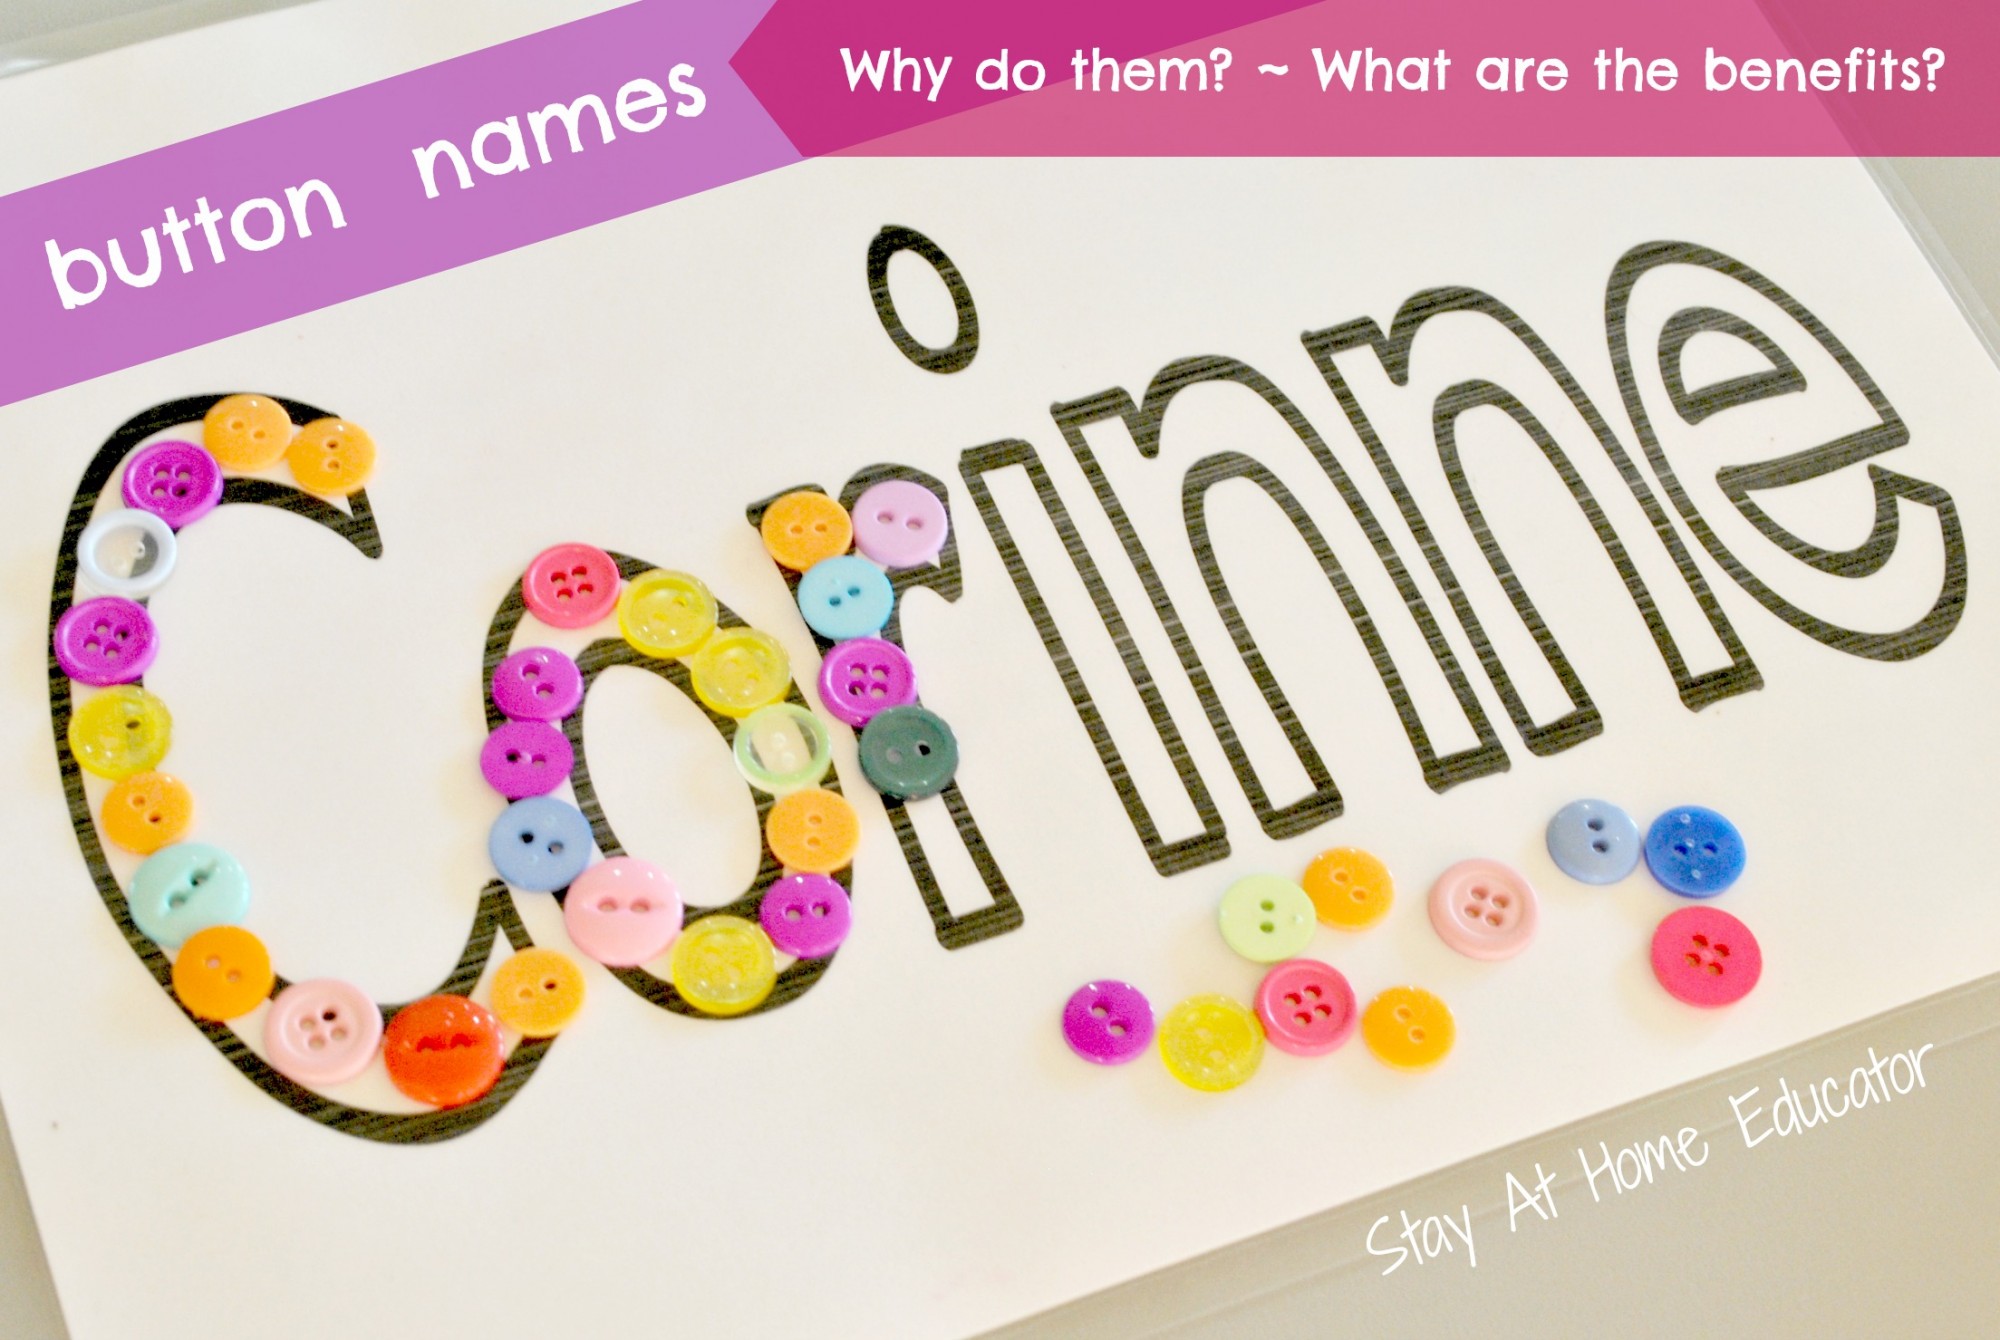 the purpose and benefits behind button names in preschool education - Stay At Home Educator